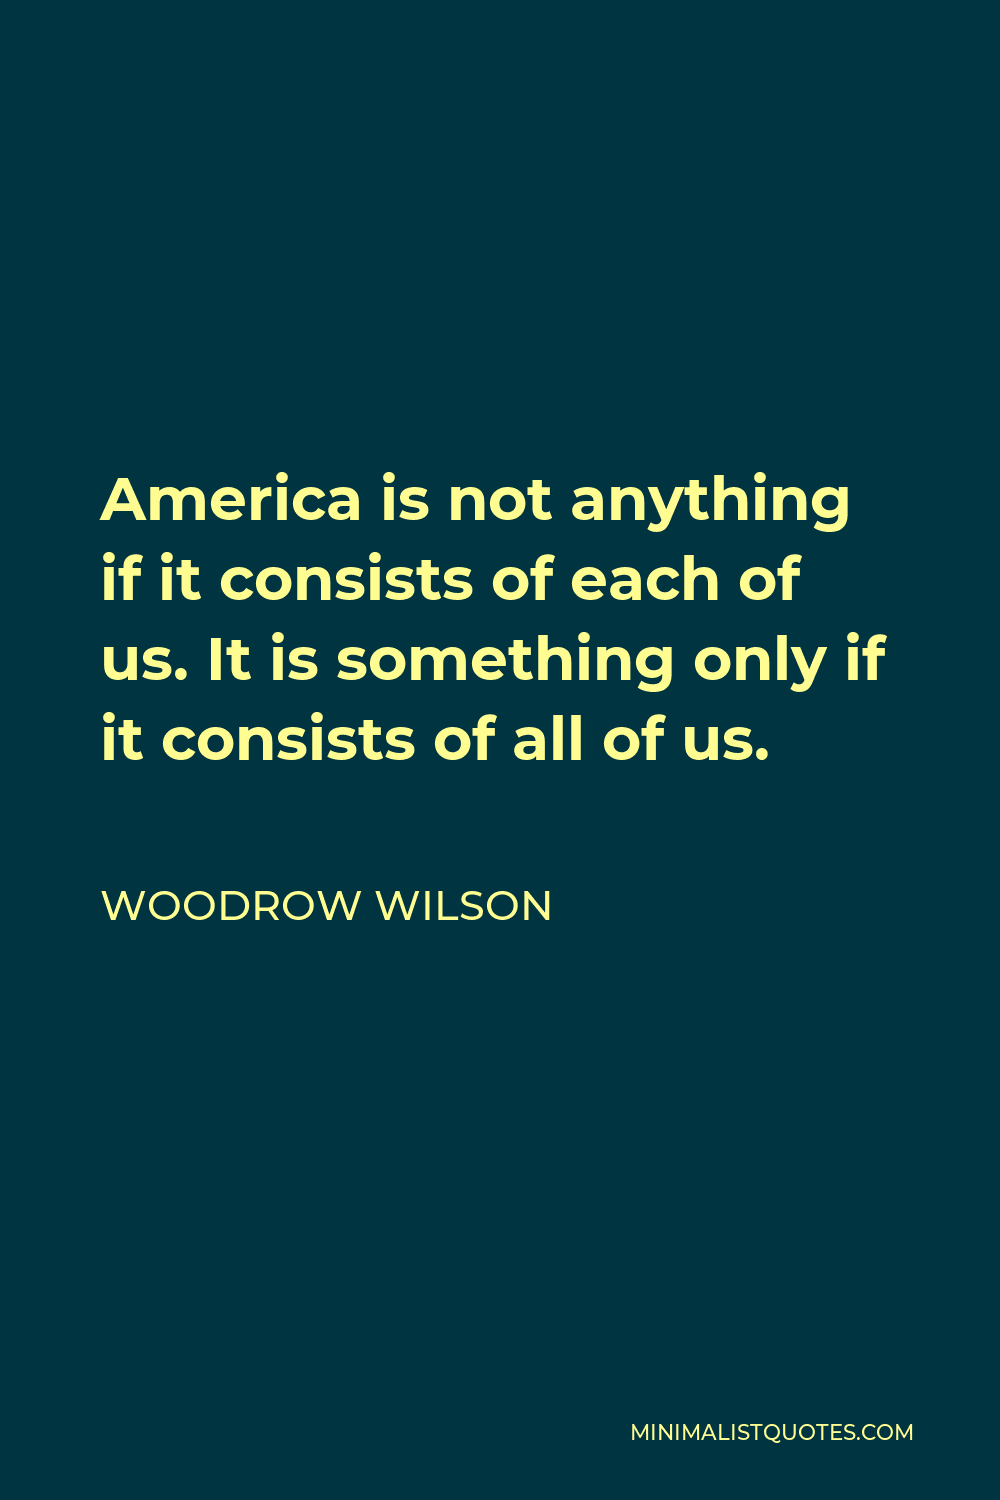 Woodrow Wilson Quote - America is not anything if it consists of each of us. It is something only if it consists of all of us.